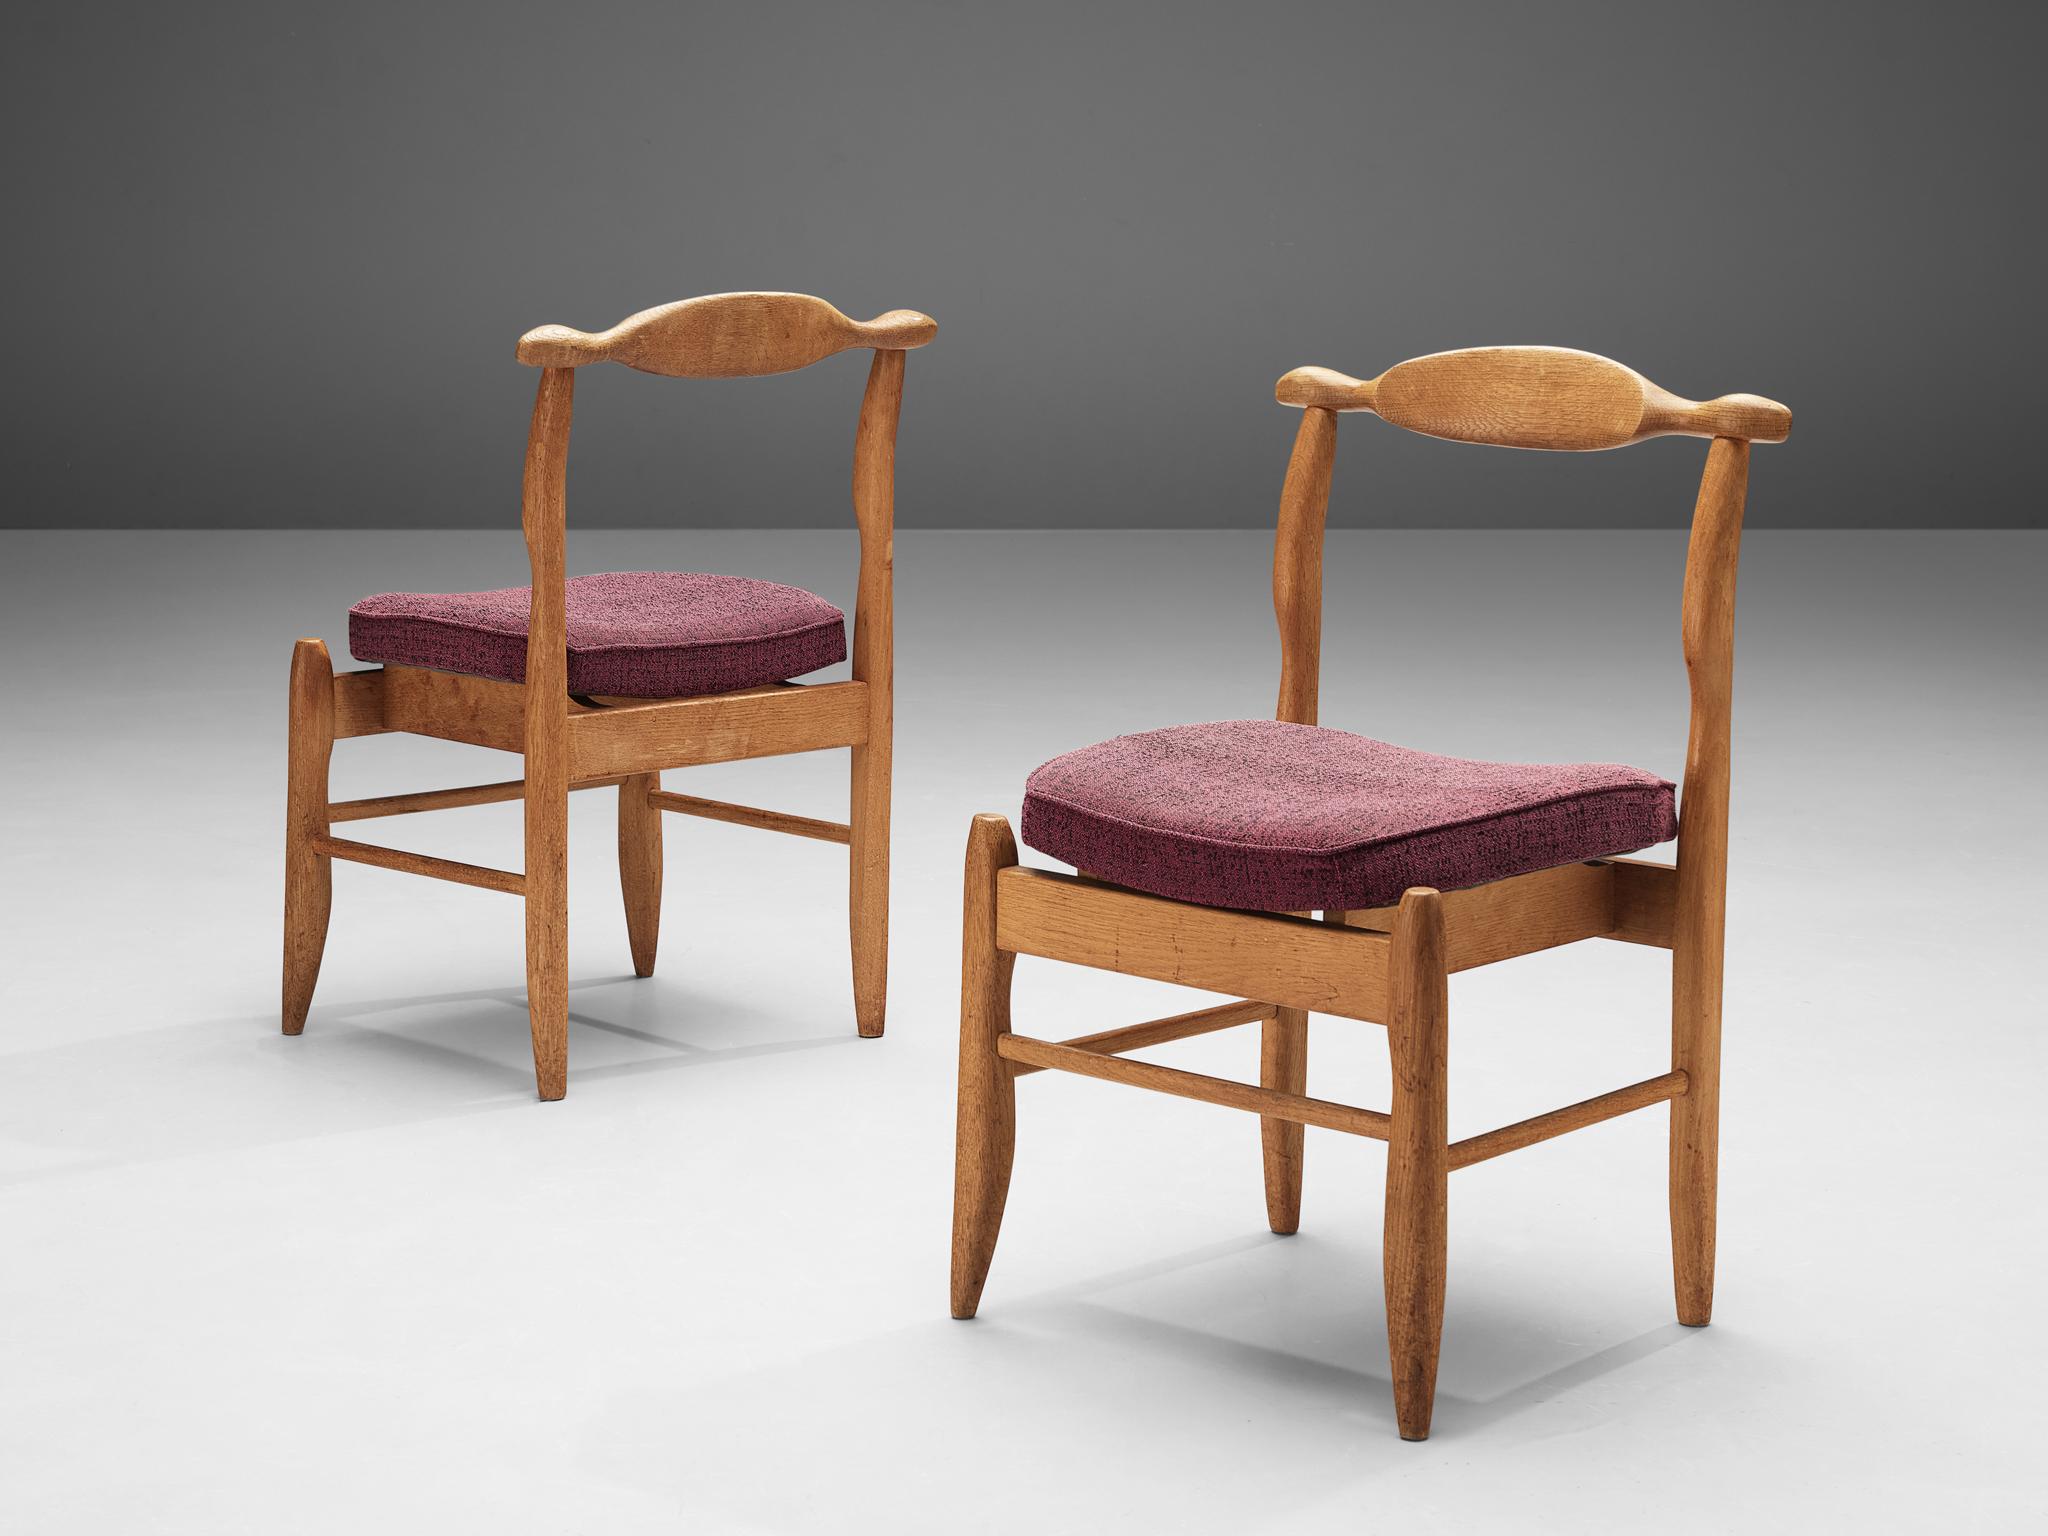 Guillerme et Chambron for Votre Maison, pair of dining chairs model 'Fumay', oak, fabric, France, 1960s

Beautifully shaped chairs in oak by French designer duo Jacques Chambron and Robert Guillerme. These dining chairs show beautiful lines in every